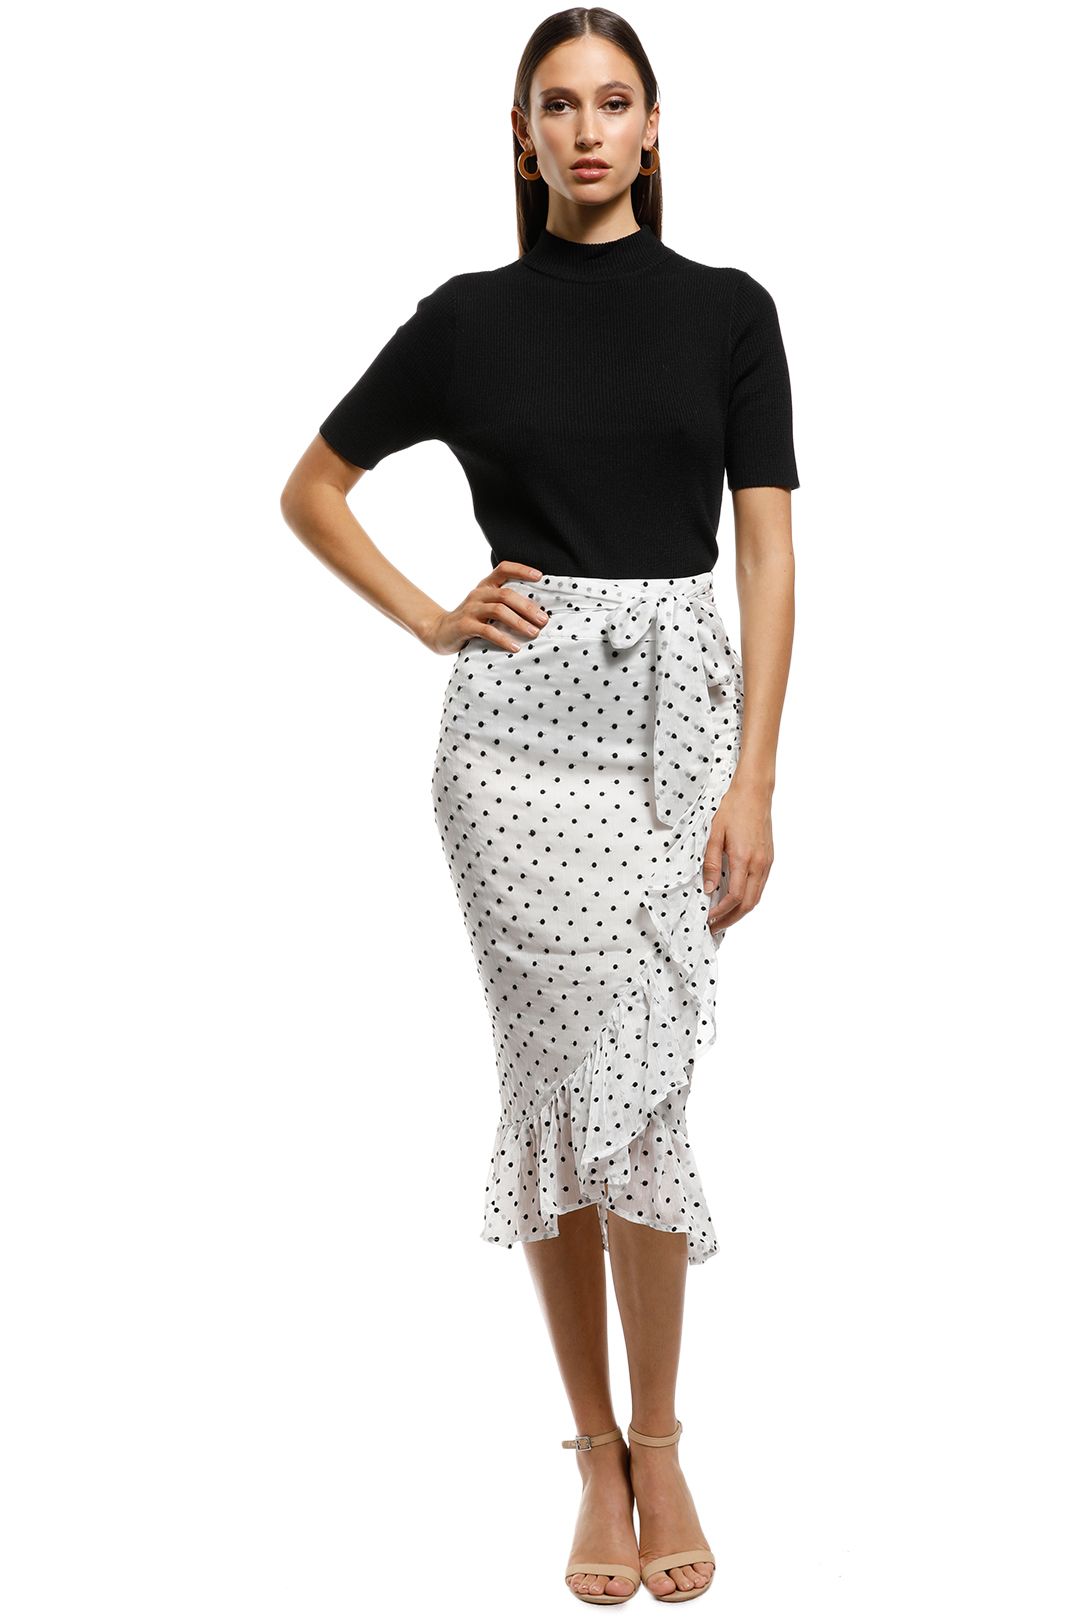 Ministry of Style - Illusion Skirt - Ivory - Front